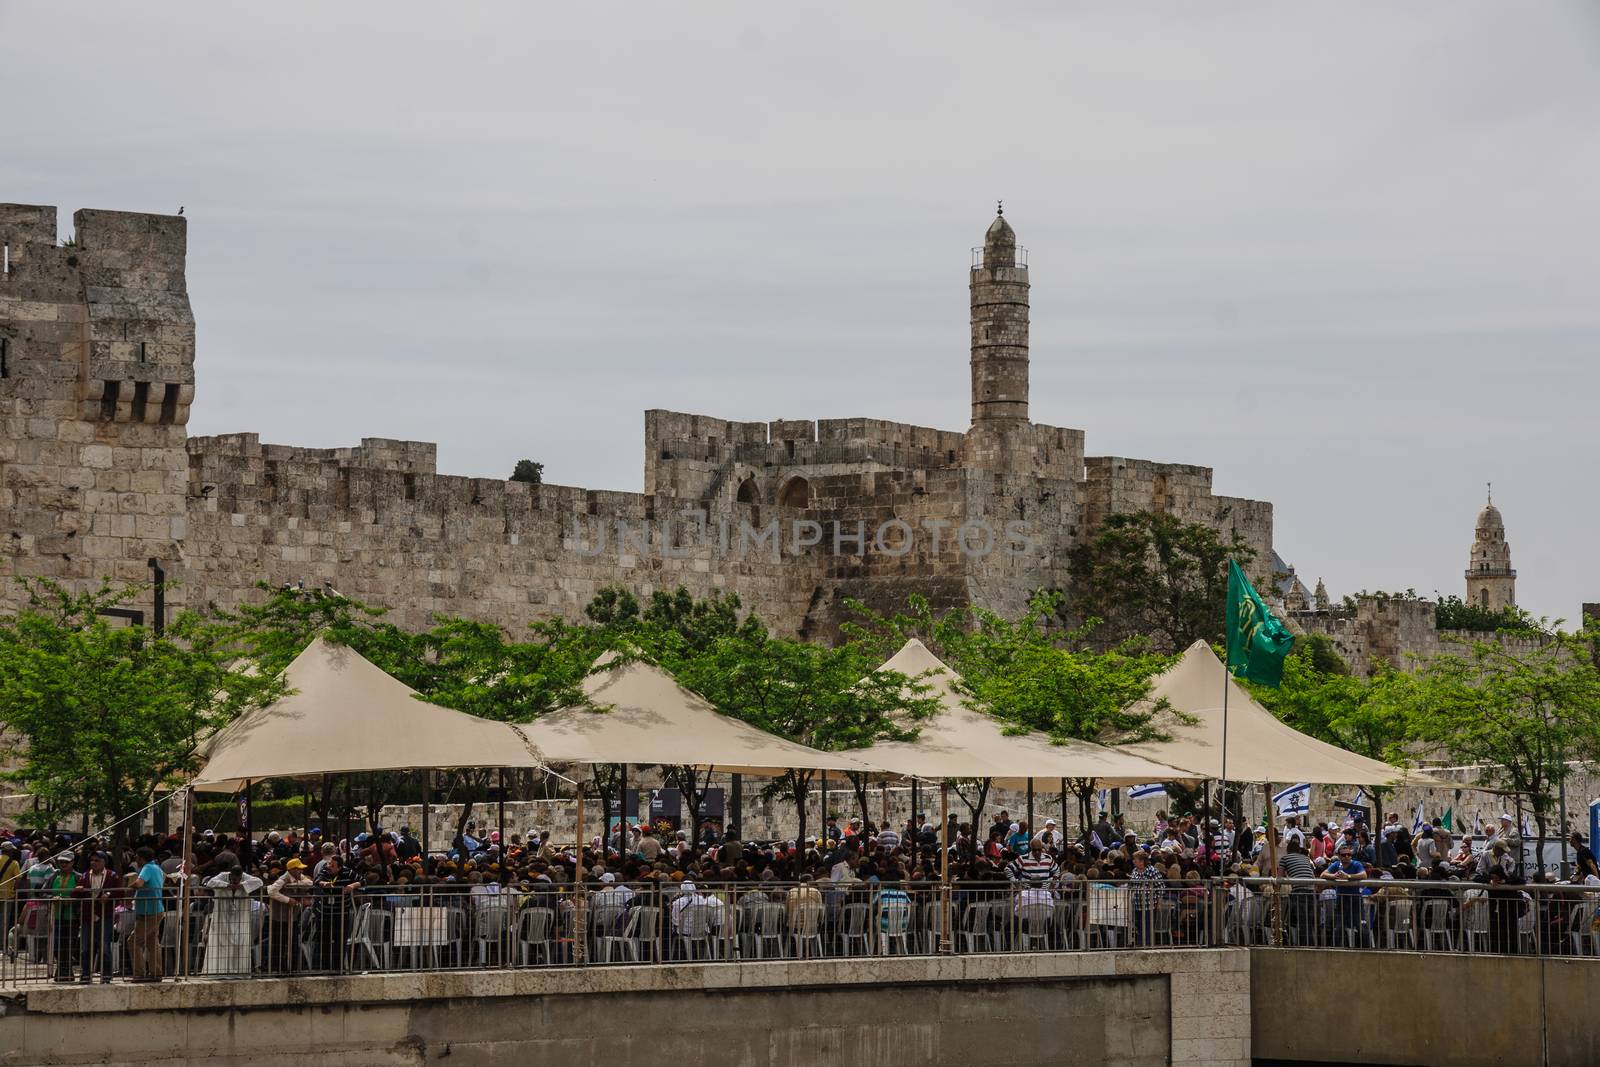 JERUSALEM - APRIL 19, 2014: A crowd of pilgrims outside the Jaffa Gate (in the walls of the old city) waiting for the holy fire ceremony, on Holy Saturday, in Jerusalem, Israel